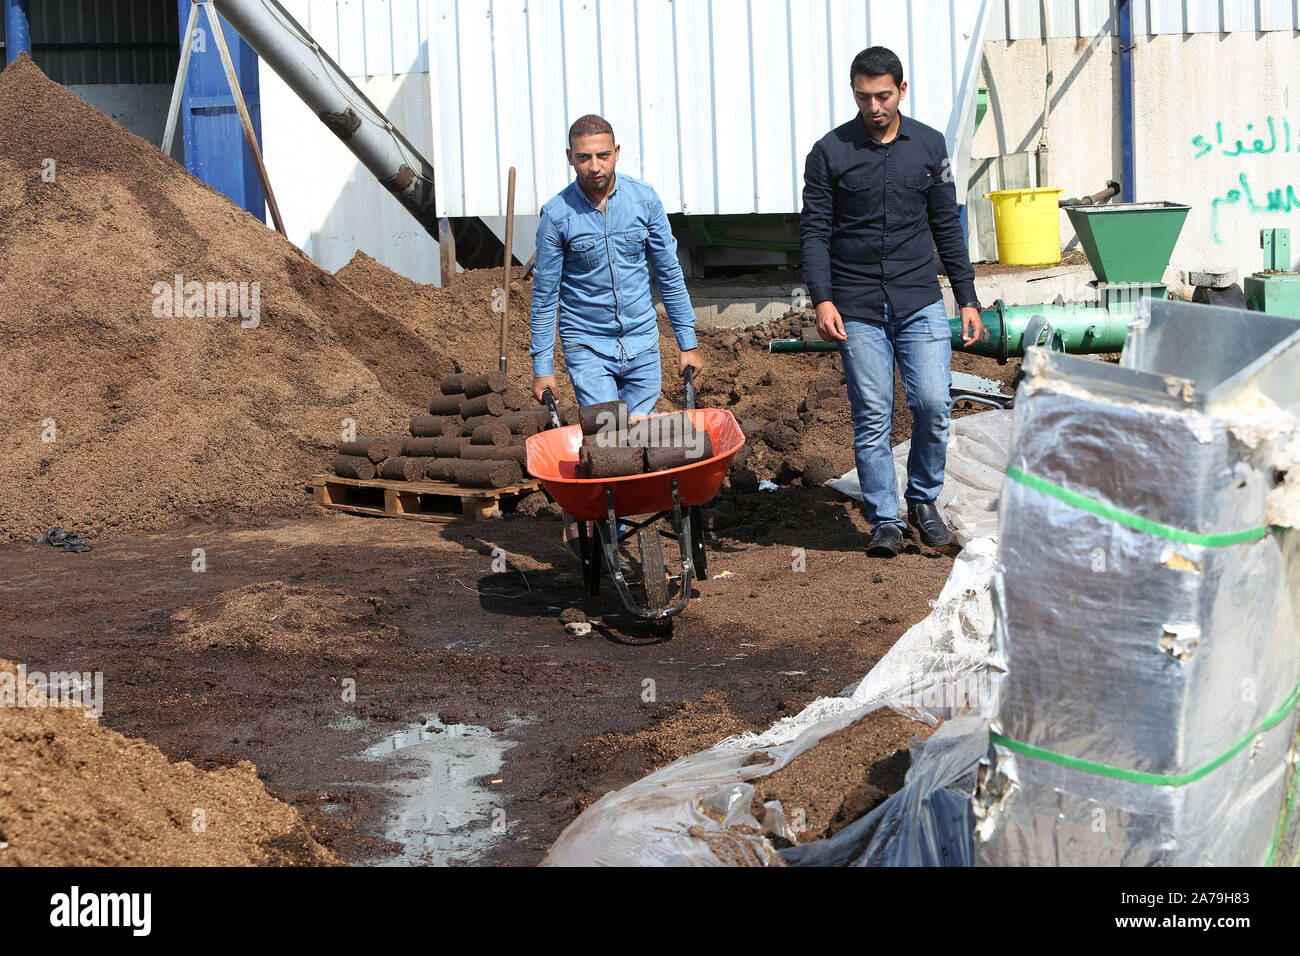 Palestinians make molds from olive pomace that is obtained from the olive oil extraction process and used as an energy source, in the Gaza Strip Stock Photo